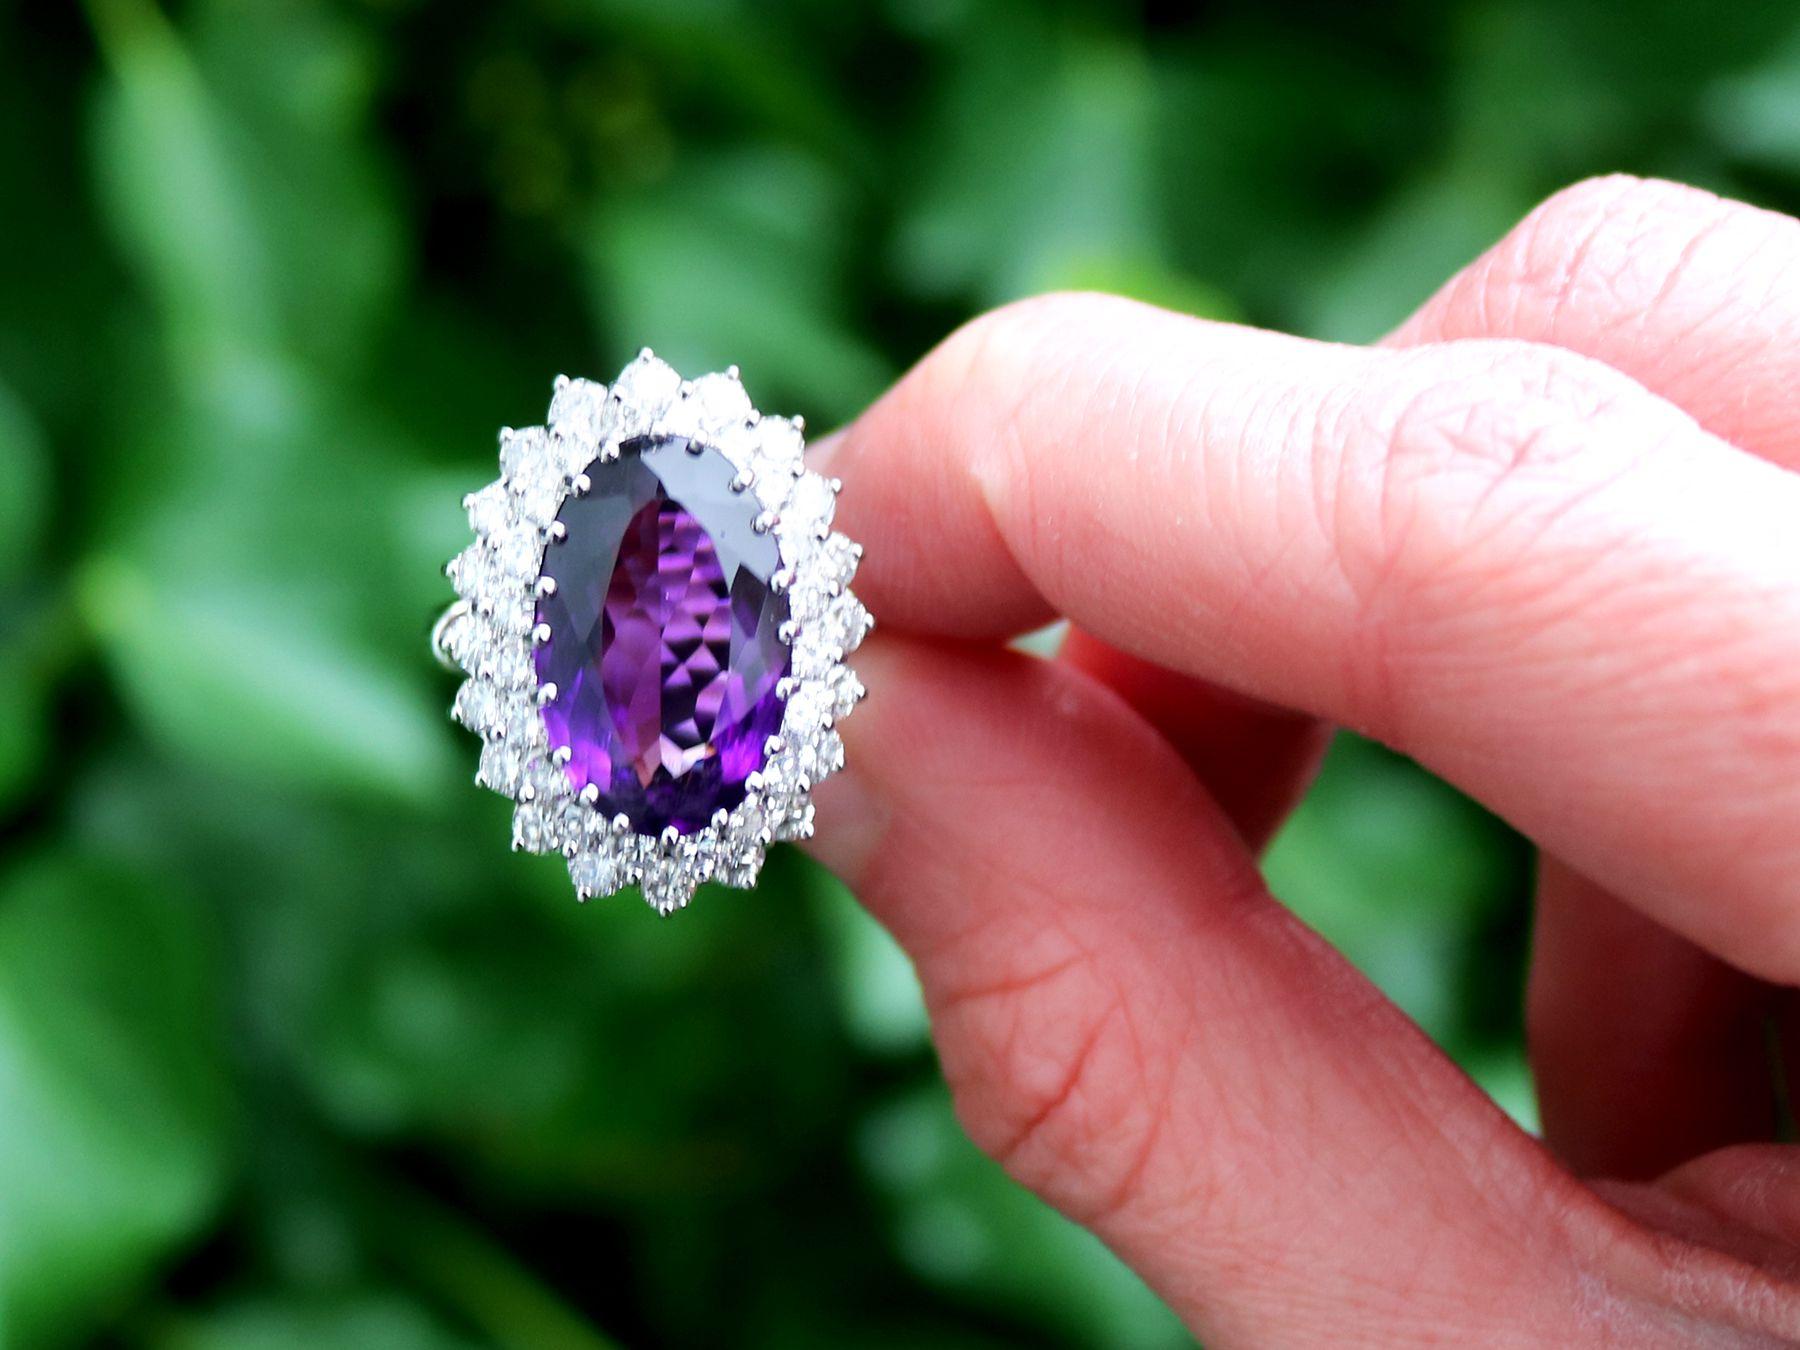 A stunning, fine and impressive 8.36 carat amethyst and 2.26 carat diamond, 18 karat white gold cluster ring; part of our diverse vintage jewelry and estate jewelry collections.

This stunning, fine and impressive vintage amethyst ring has been